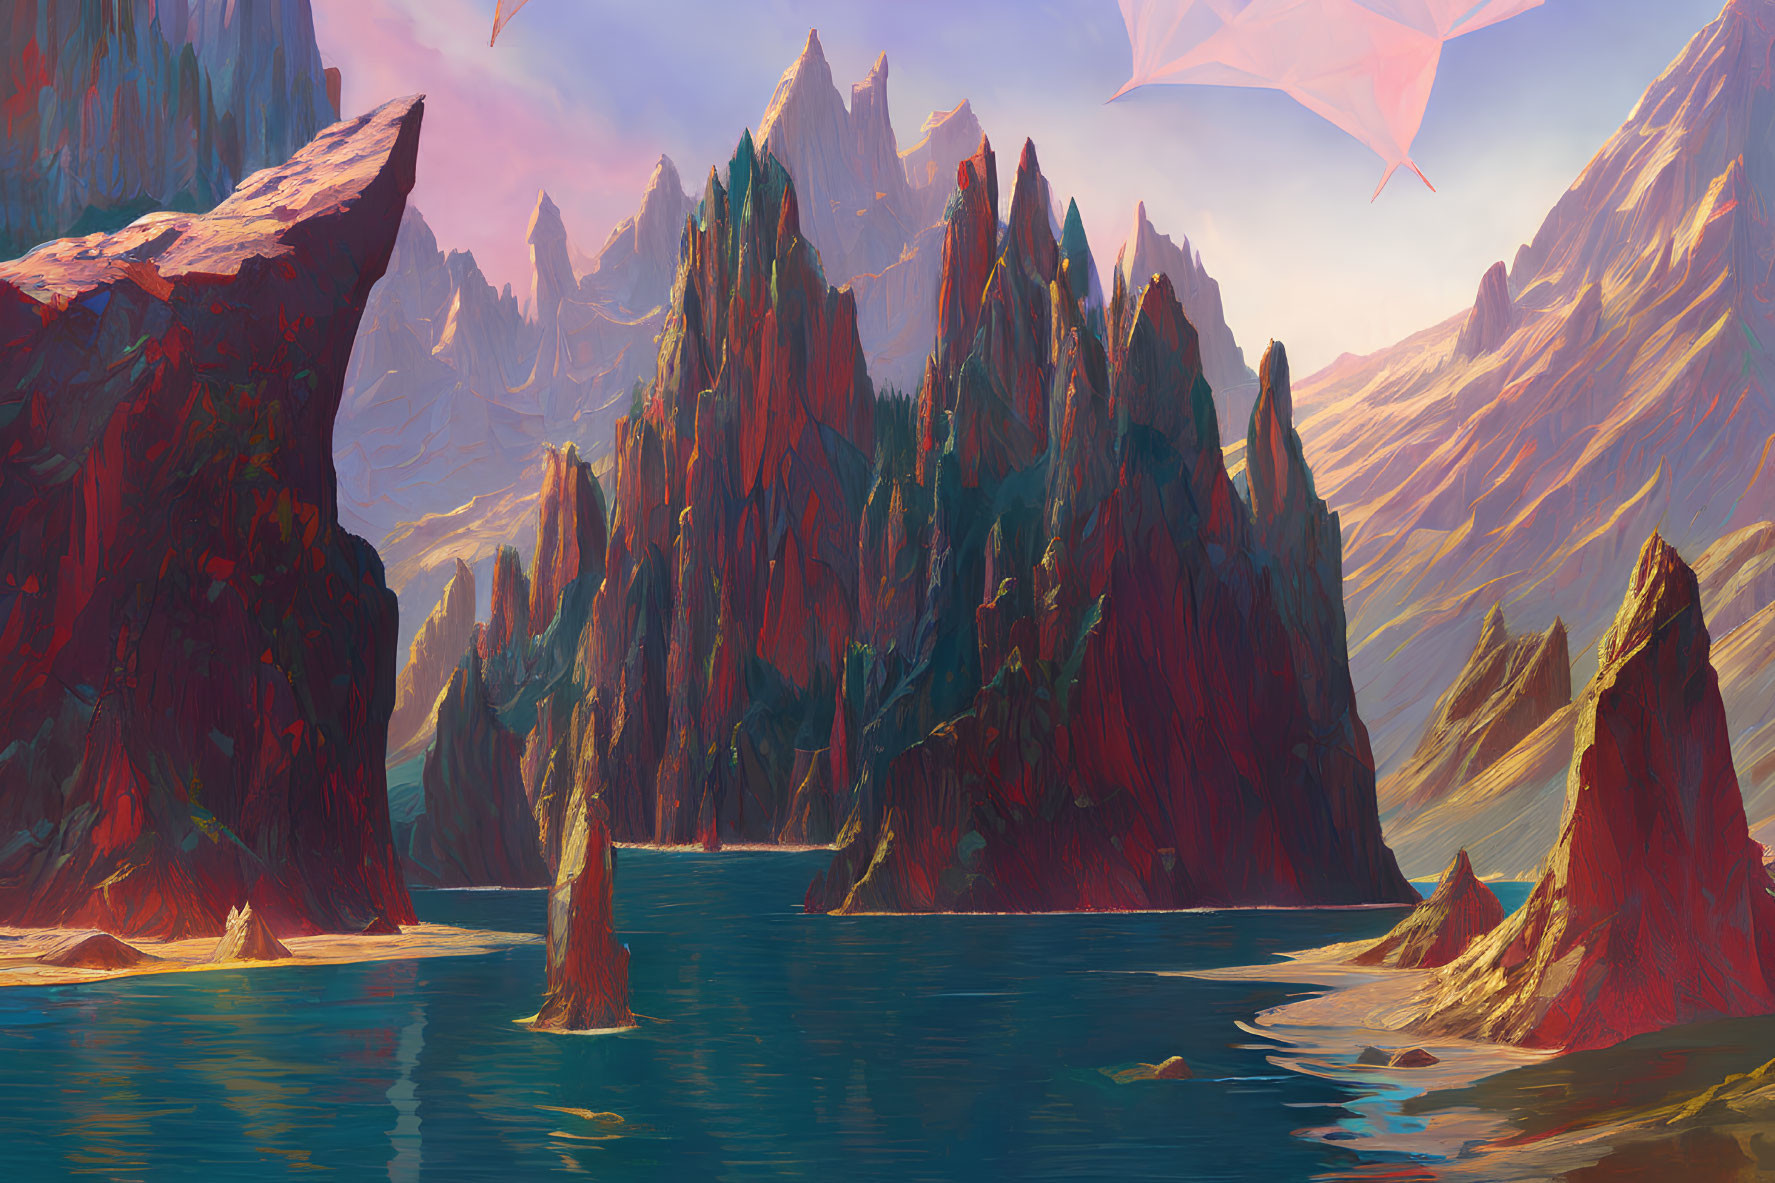 Fantasy landscape with red mountains, blue lake, and flying dragon